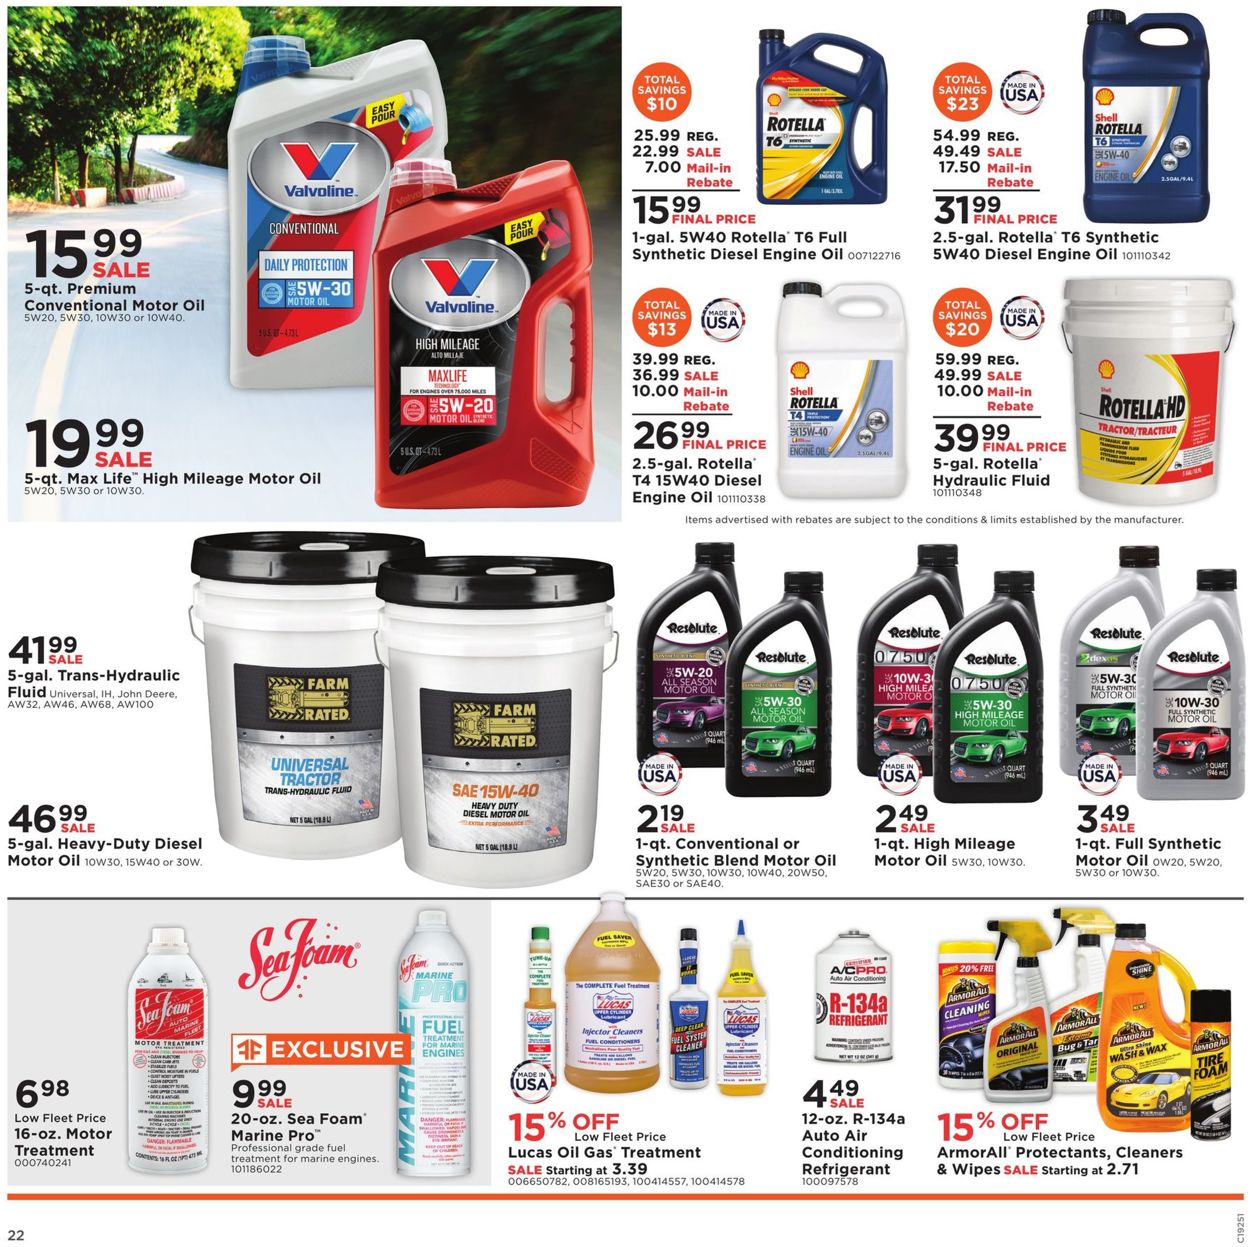 mills-fleet-farm-current-weekly-ad-06-14-06-22-2019-22-frequent